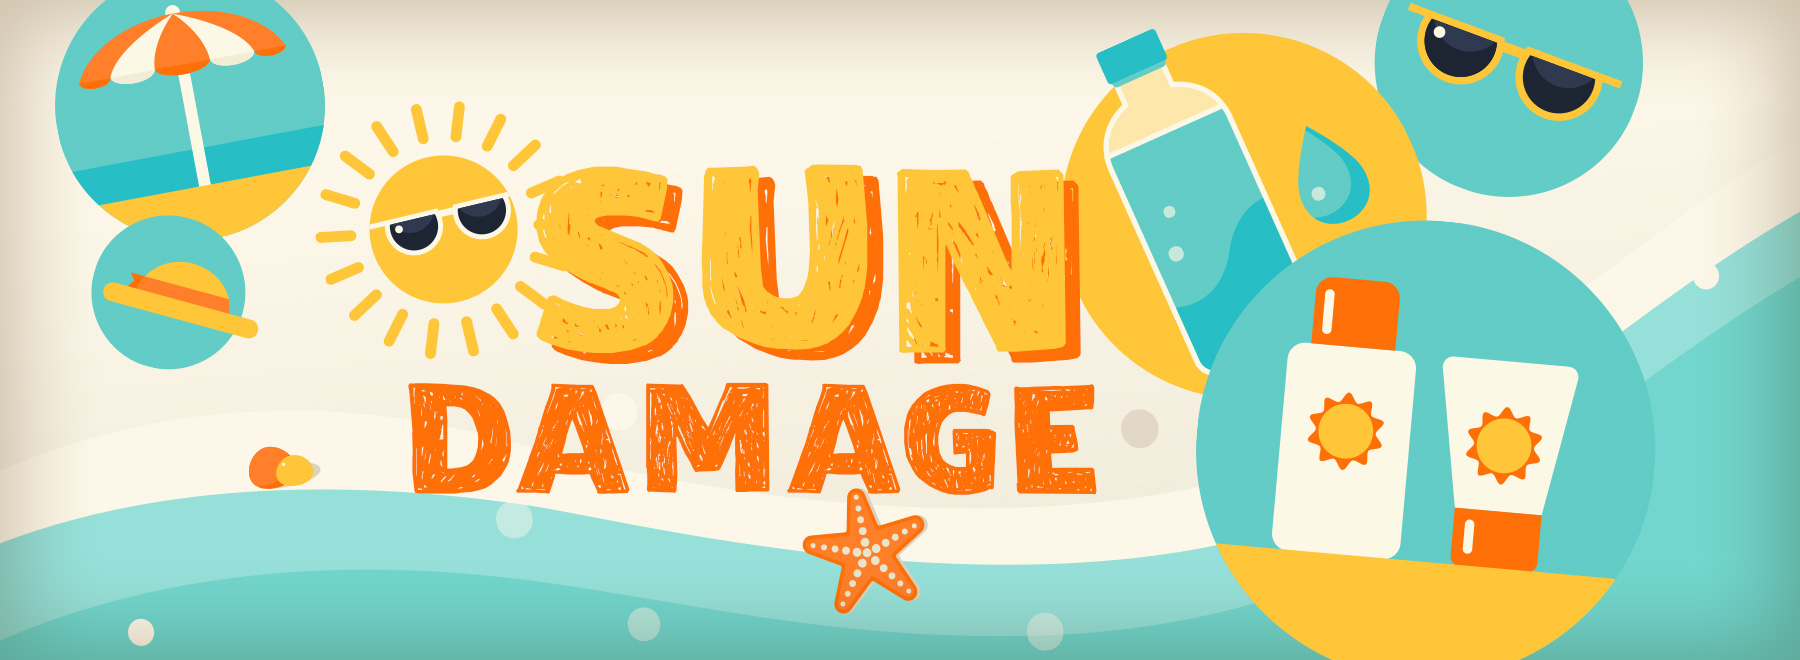 Sun damage art with sun related icons